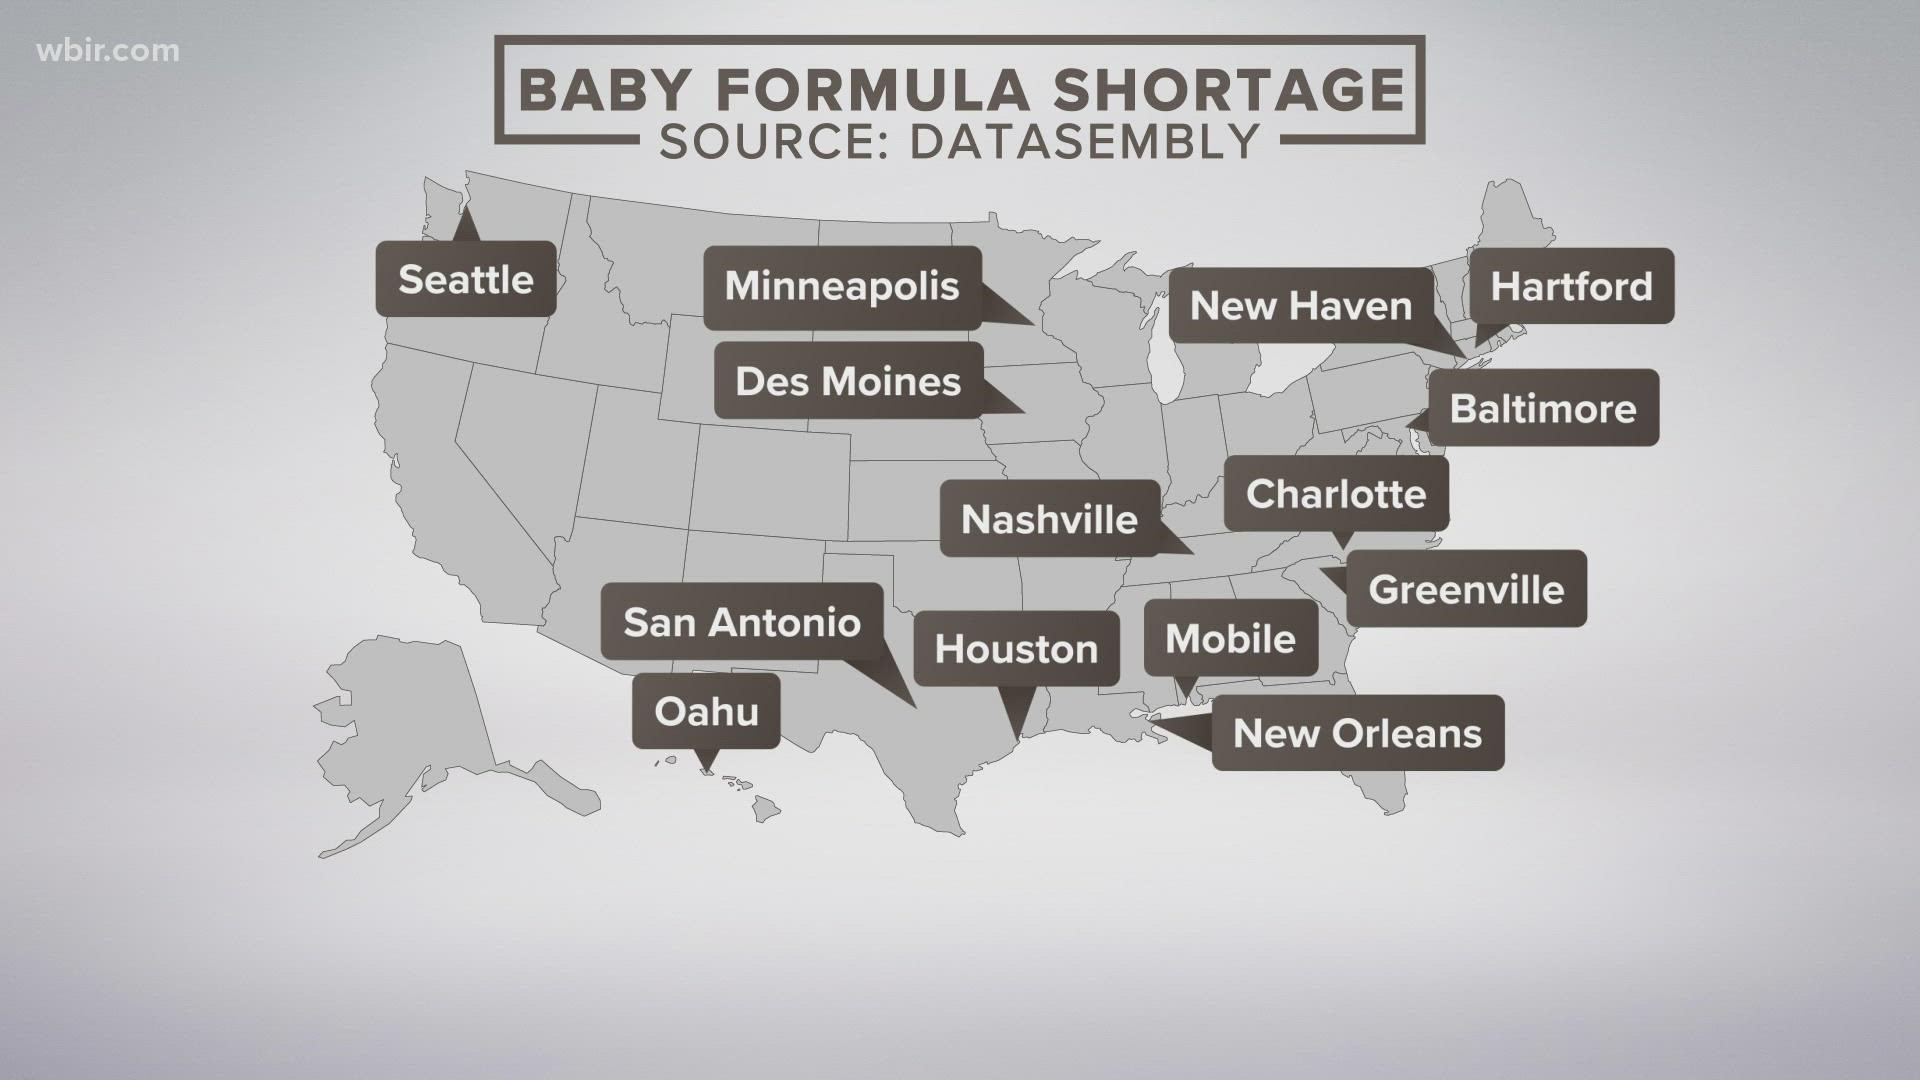 Data shows 40% of baby formula suppliers are out of stock across the country. Some states such as Tennessee are feeling the impact more than others.